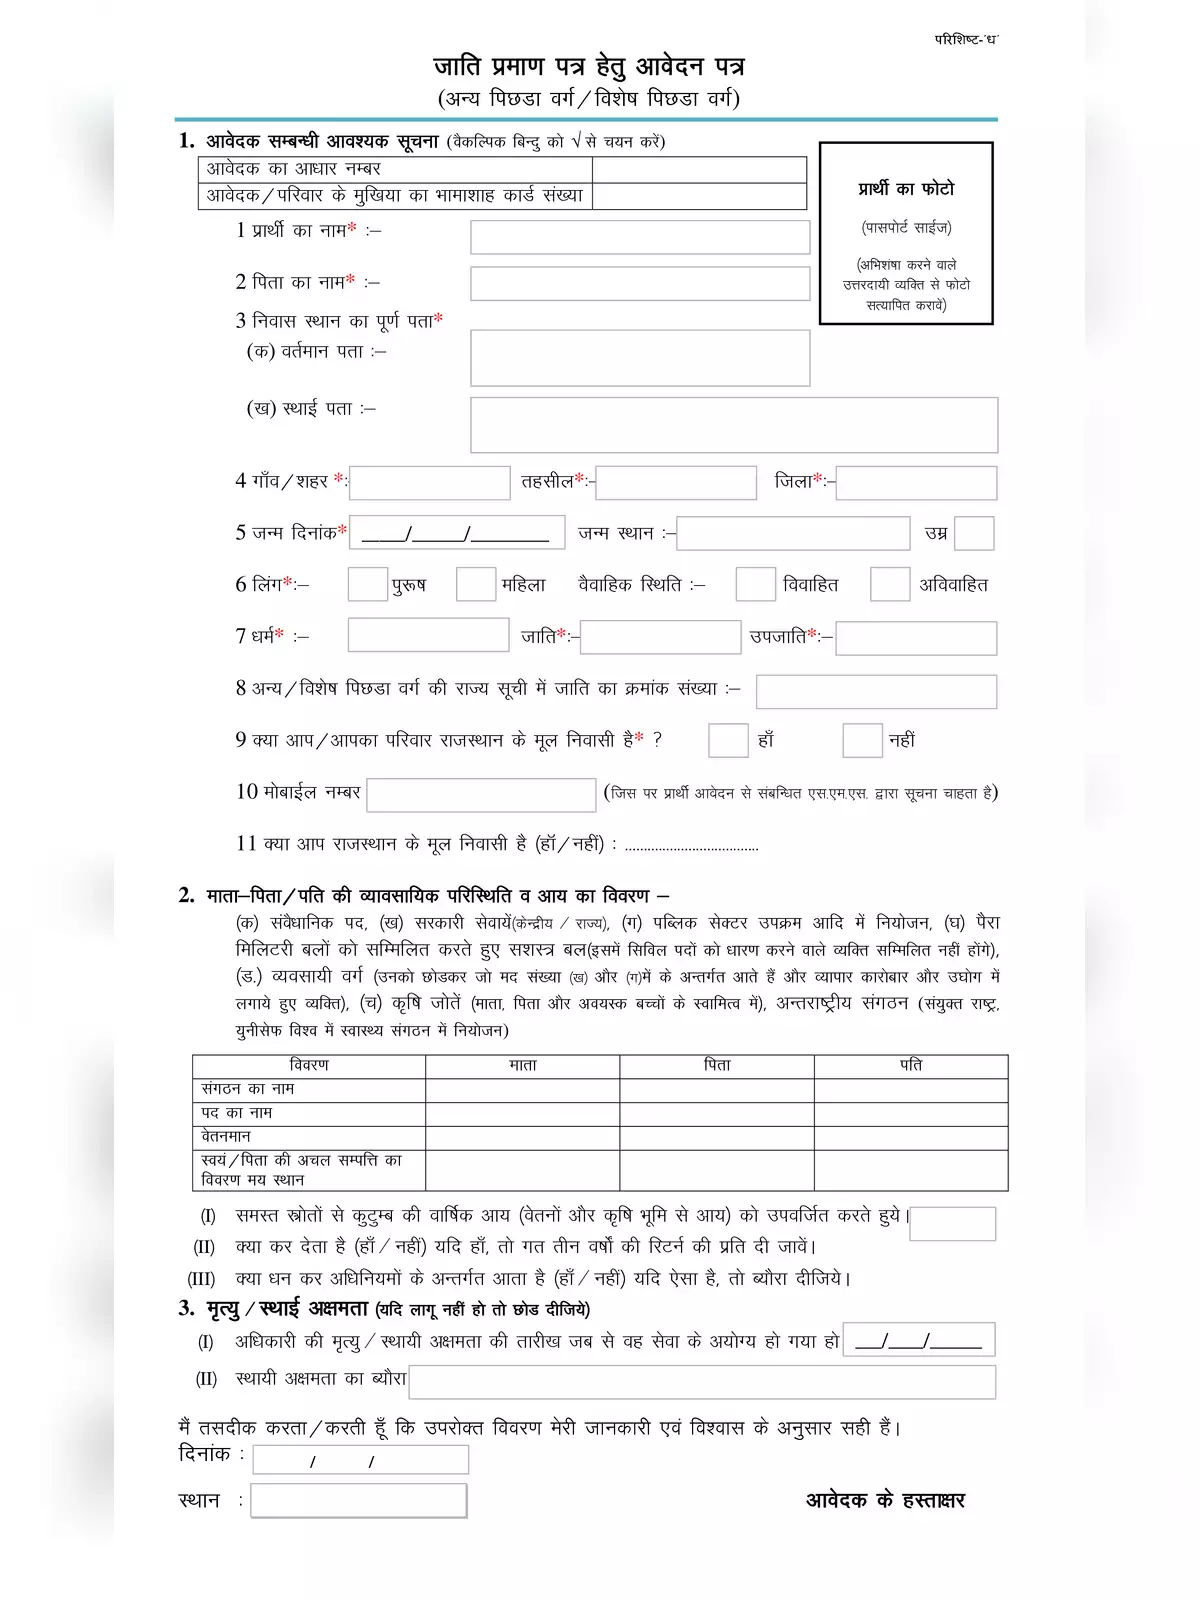 OBC Caste Certificate Form Rajasthan